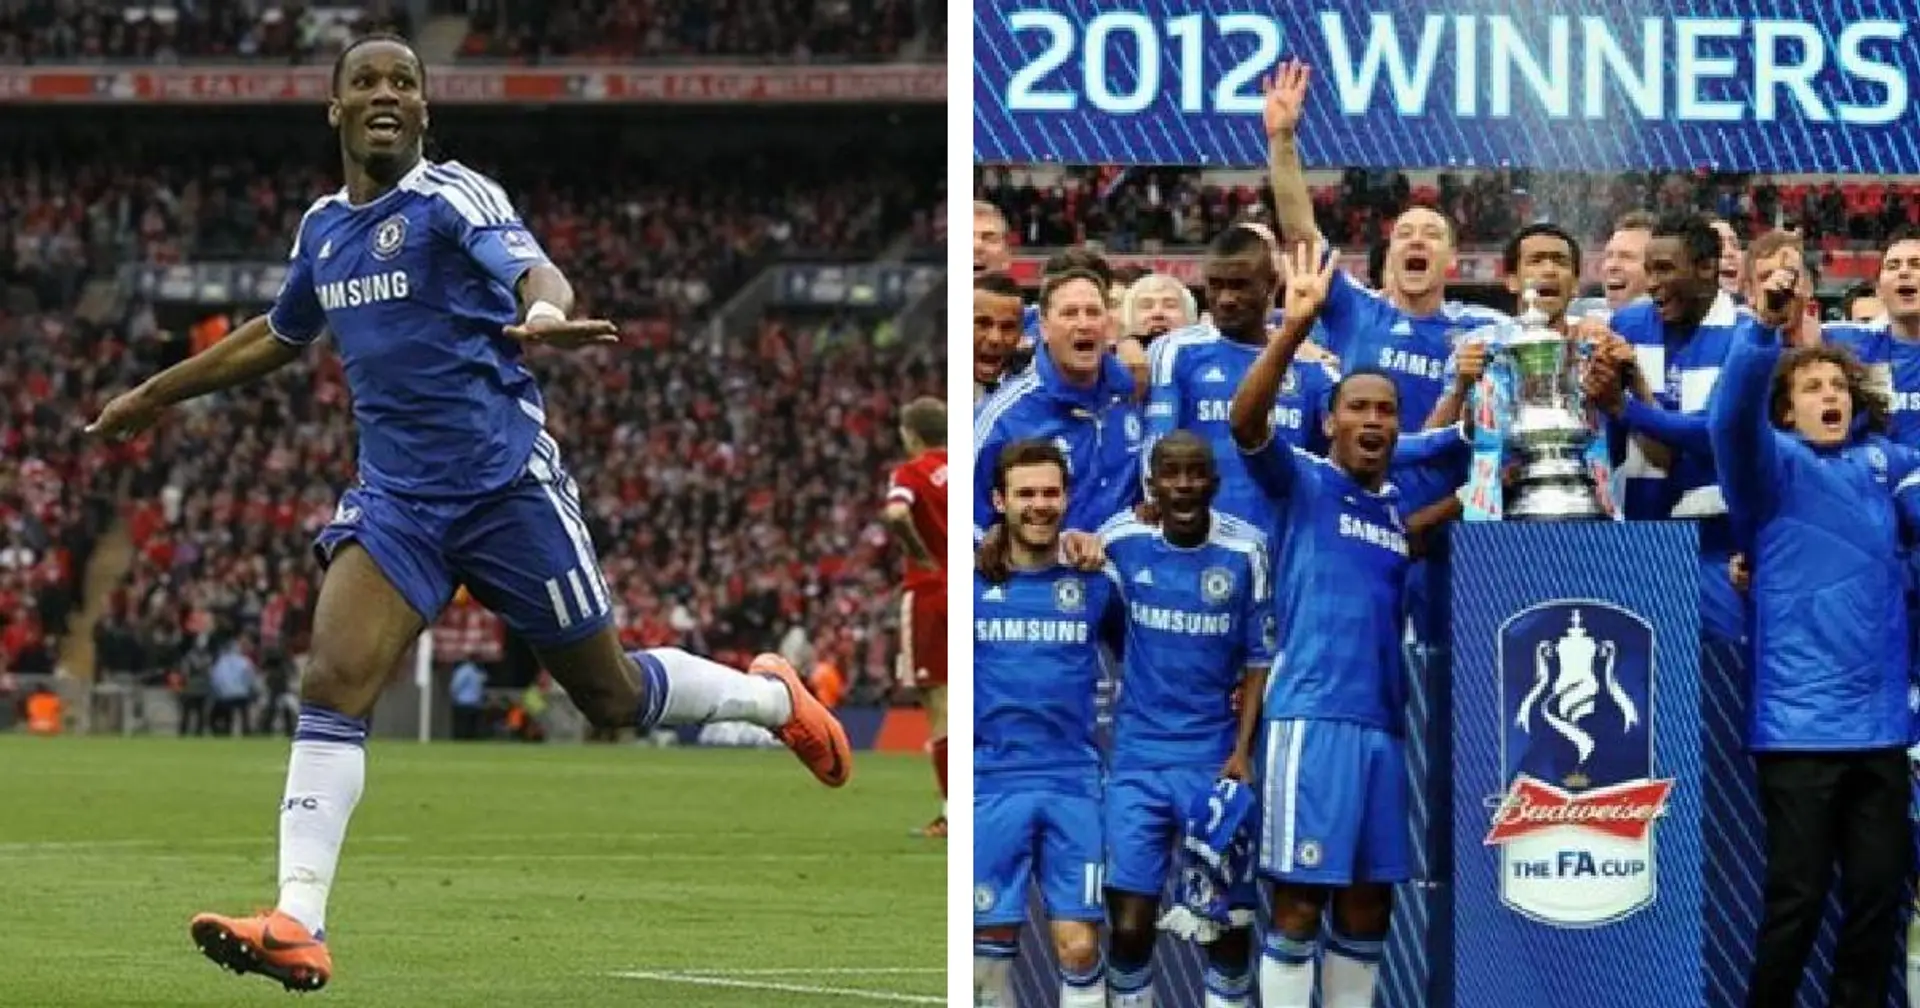 Drogba and Ramires win it: Re-live Chelsea's 2012 FA Cup triumph over Liverpool ahead of today's game (video)